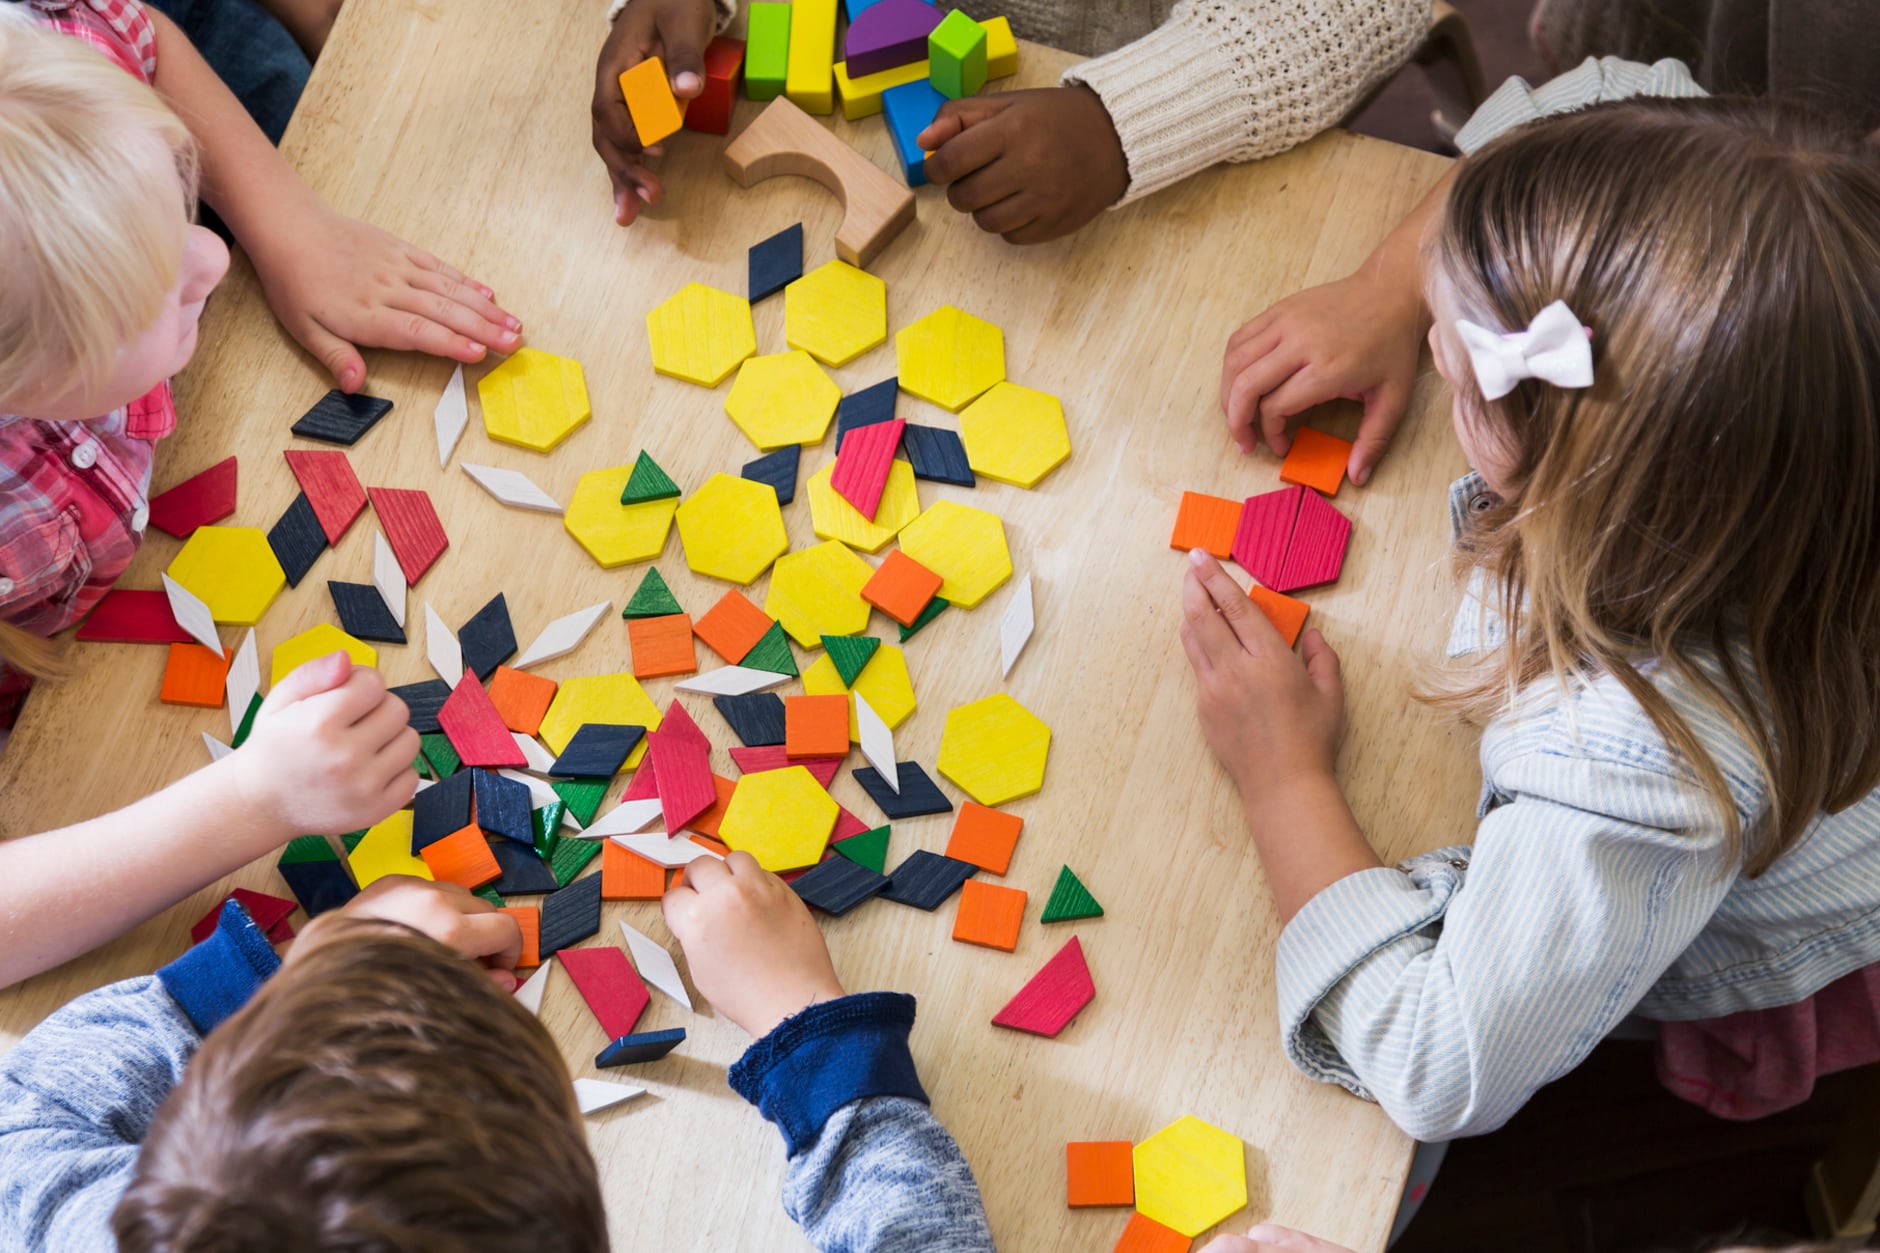 An overhead view of a group of five preschoolers sitting at a table playing with colorful blocks and geometric shapes. They are unrecognizable since we see the tops of their heads and their hands. They are in a preschool or kindergarden classroom.